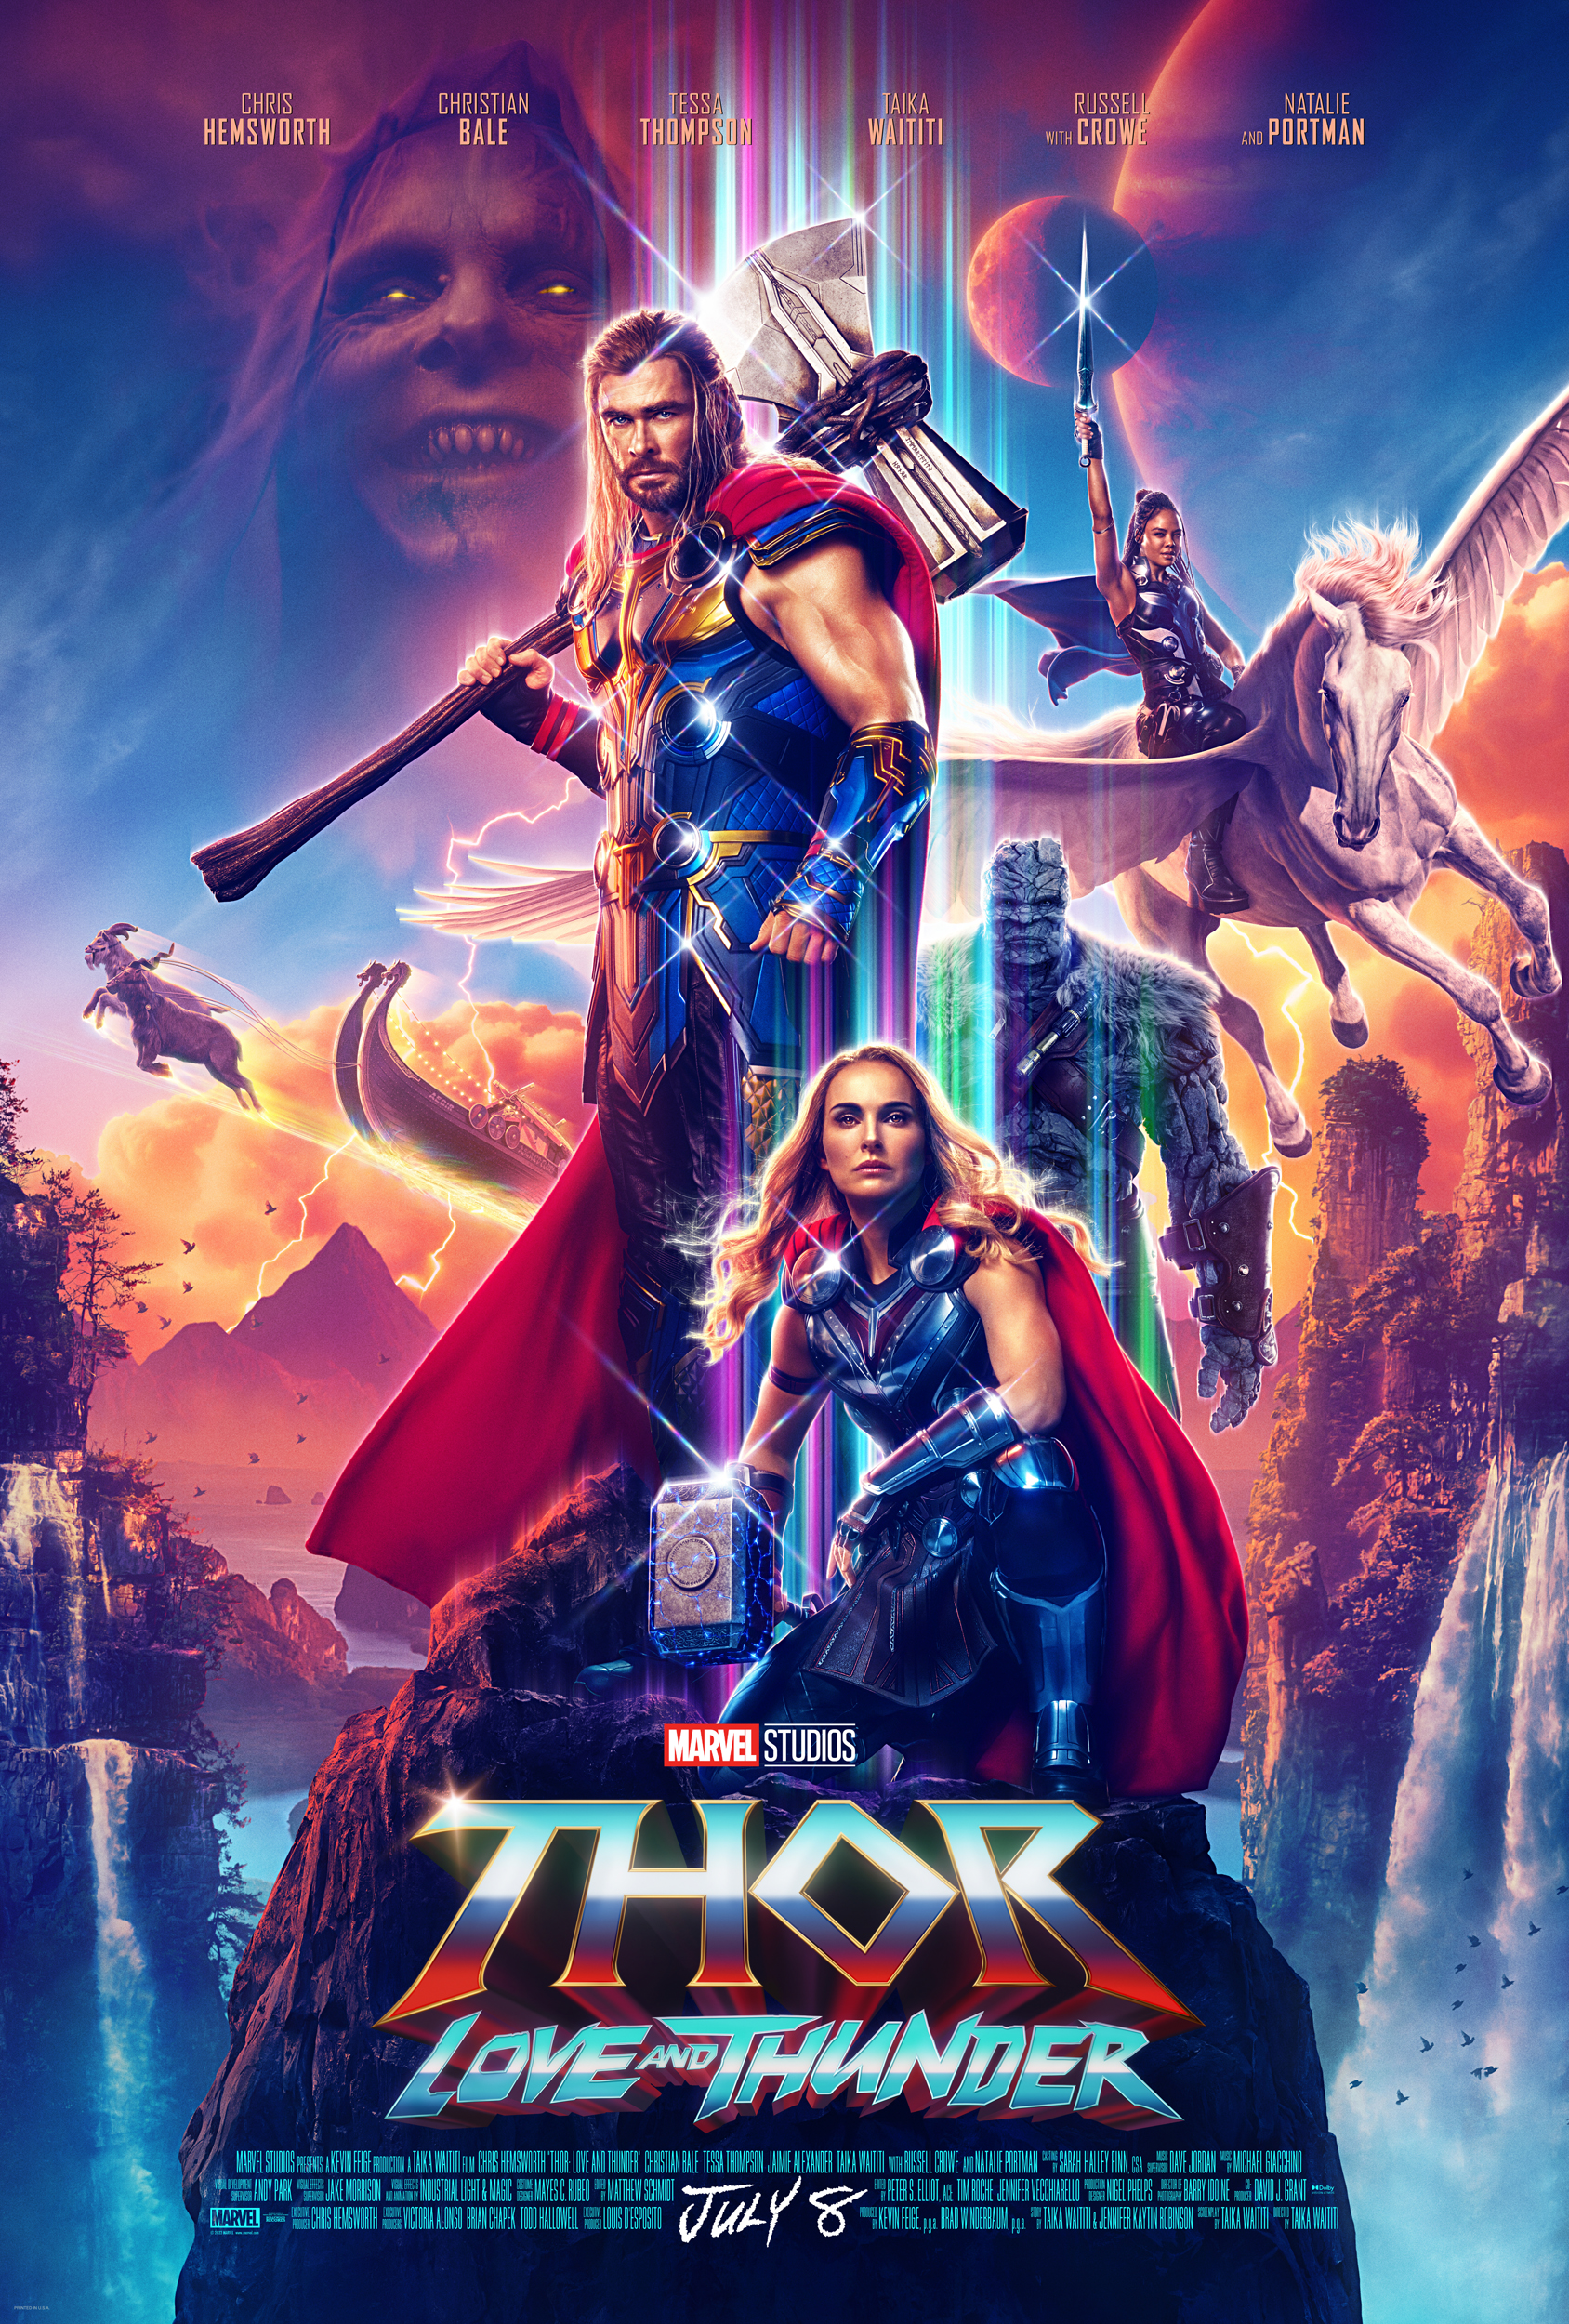 BOX OFFICE TOP TEN - JULY 2022 - Comic Book and Movie Reviews